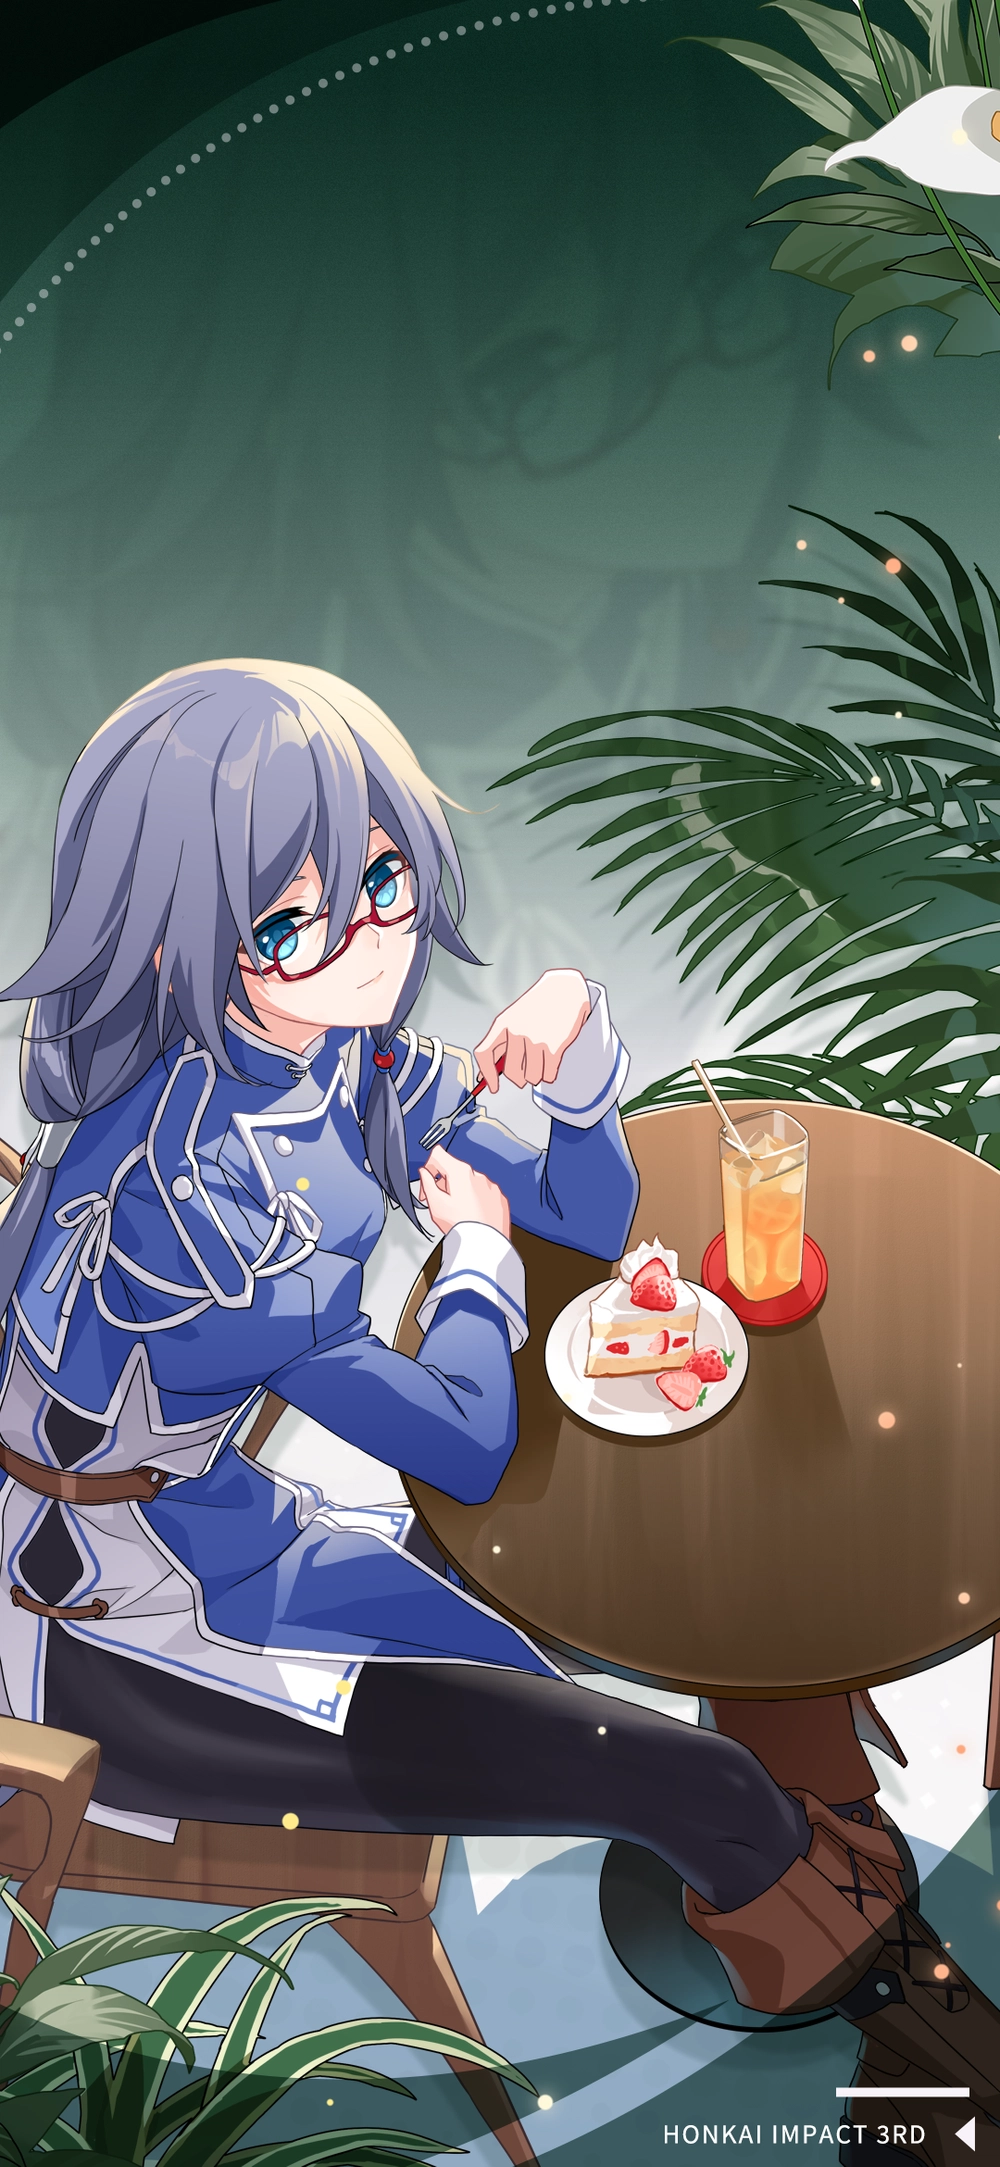 Anime 1000x2167 Honkai Impact Honkai Impact 3rd Fu Hua video game characters CGI video game girls sitting video game art table video games cake fork leaves fruit strawberries closed mouth glasses women with glasses gray hair blue eyes long sleeves uniform sweets drink plants drinking straw ice cubes anime games chair